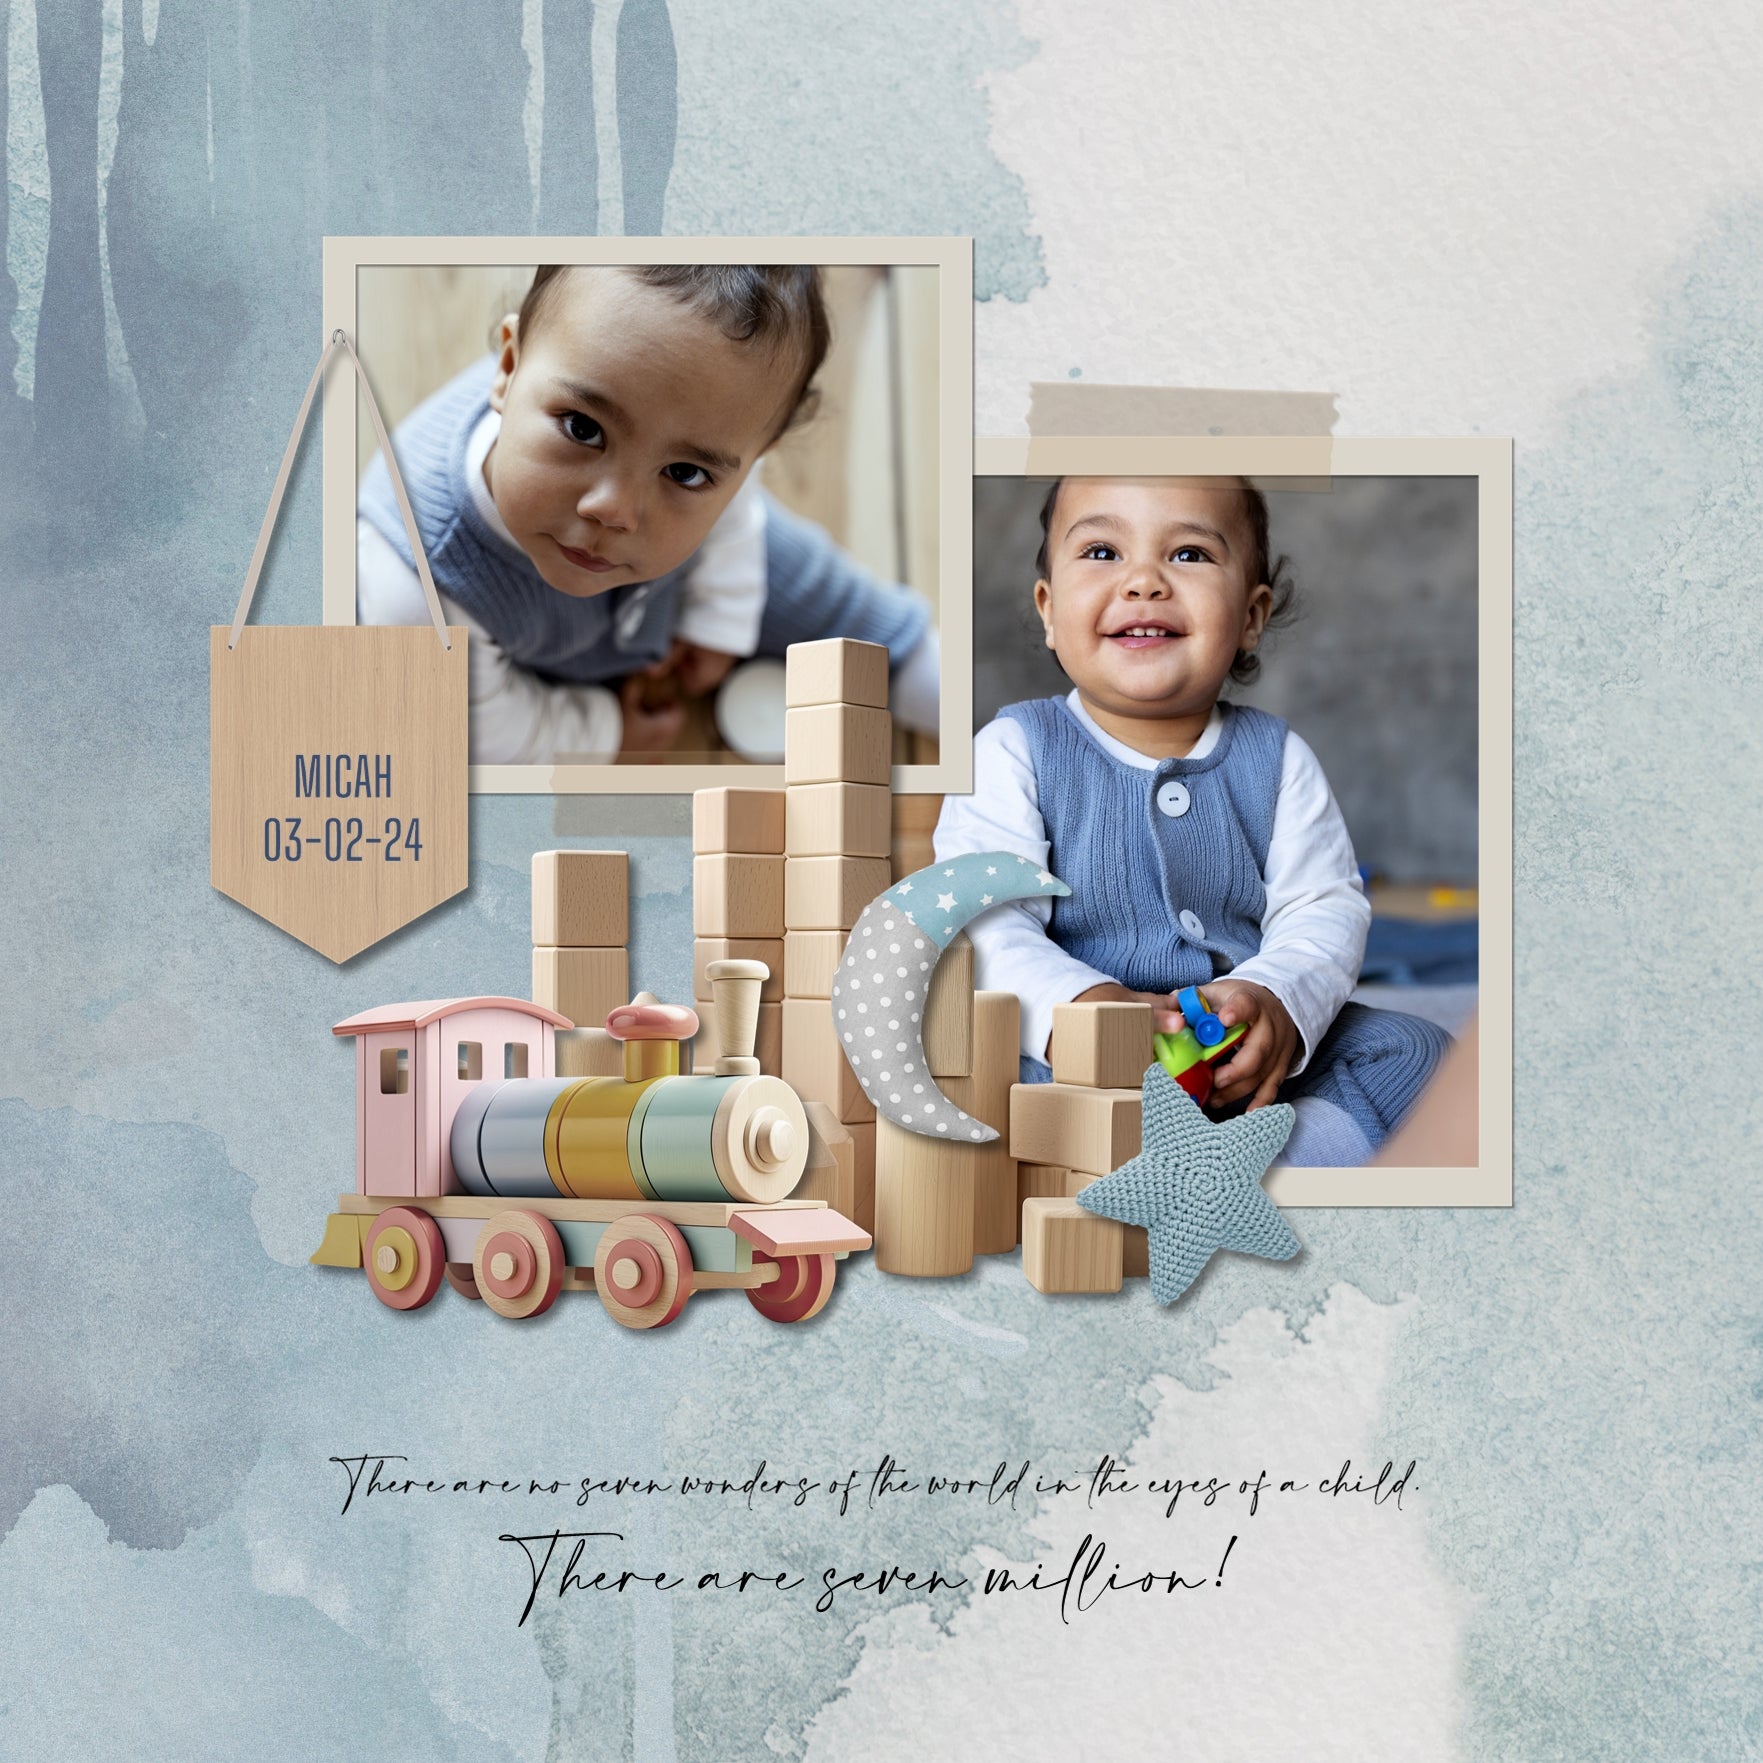 Capture the special moments of your baby through the toddler years with these versatile digital scrapbooking photo frames with washi tape by Lucky Girl Creative digital art that add a special touch to your favorite photos. Create unique baby announcements, baby shower gifts, and even Baby's 1st Year albums. Great for everyday use and can easily be colorized to fit your needs.